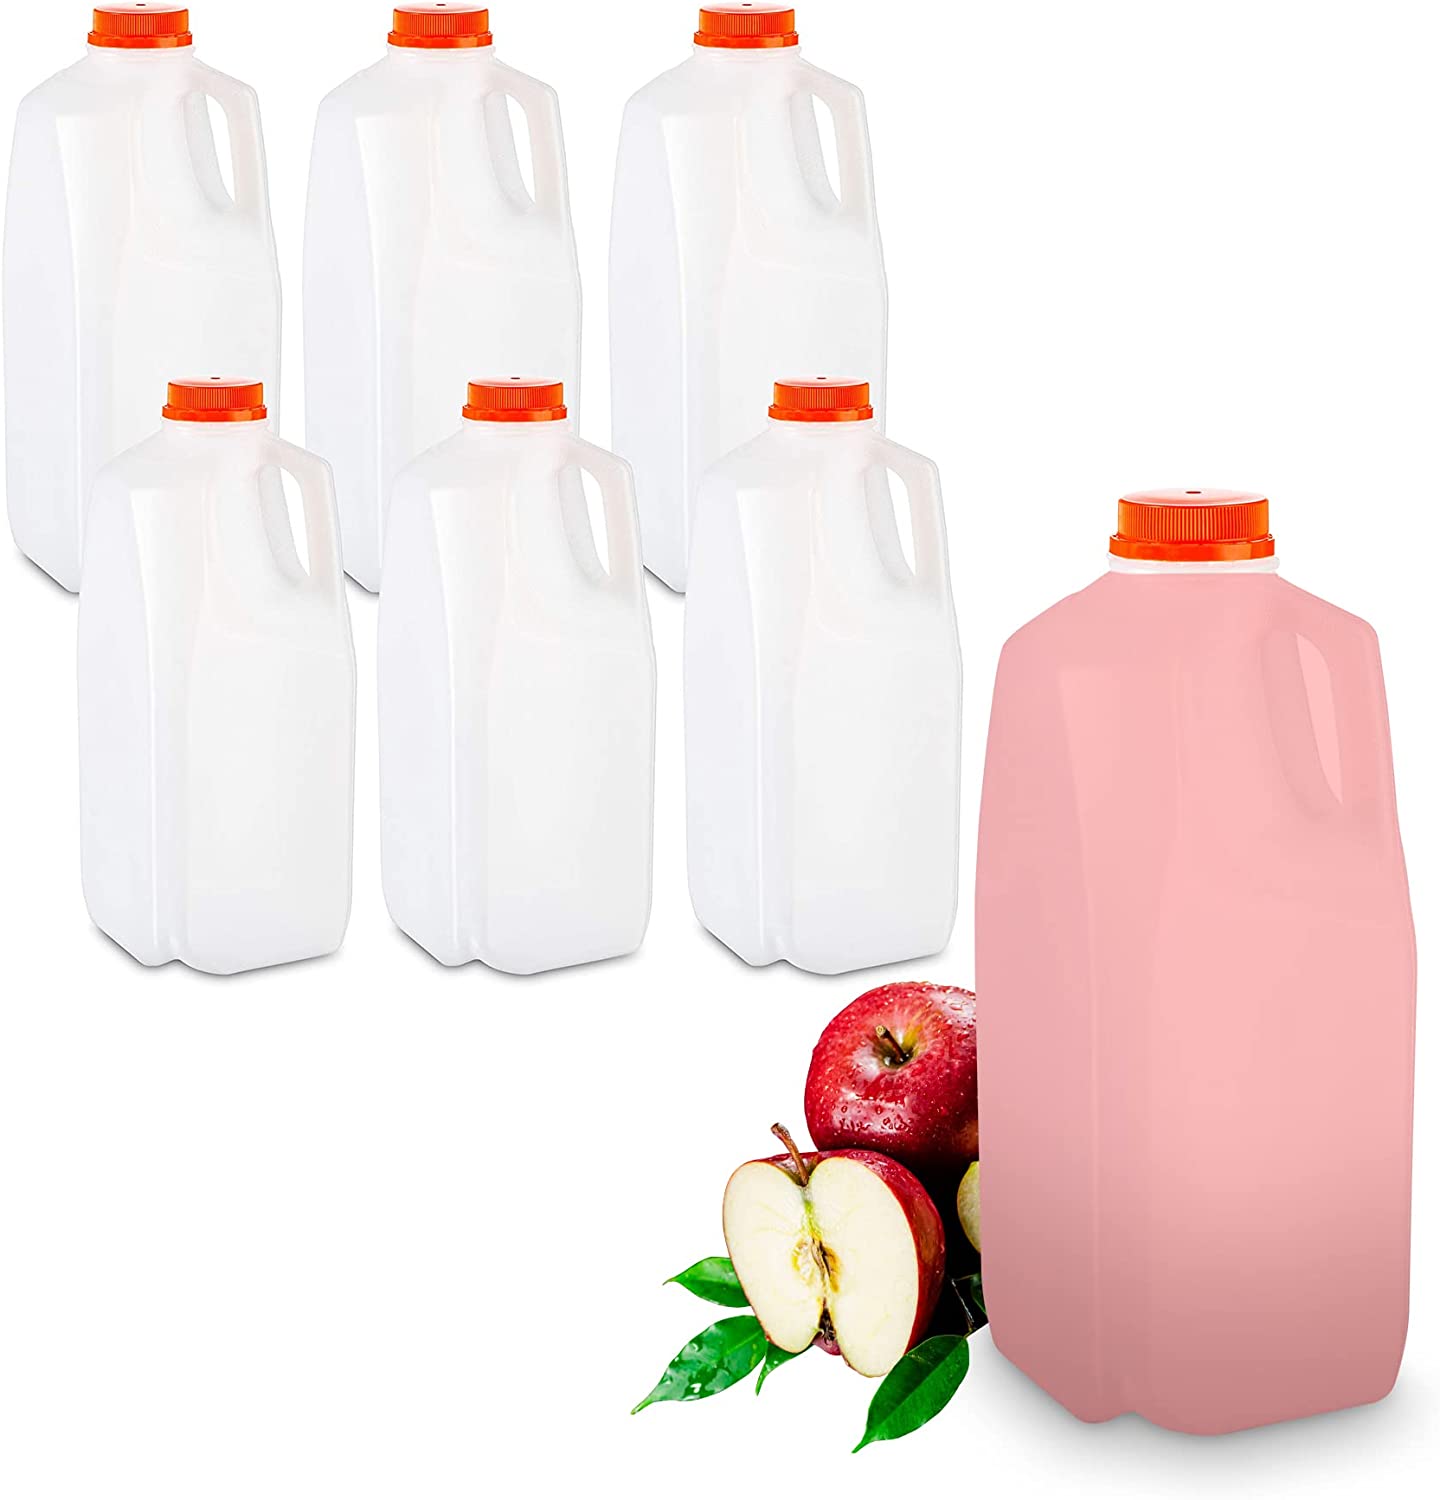 [108 Pack] 64 OZ Empty Plastic Juice Bottles with Tamper Evident Caps -  Half Gallon, Smoothie Bottles Ideal for Juices, Milk, Smoothies, Picnic's 